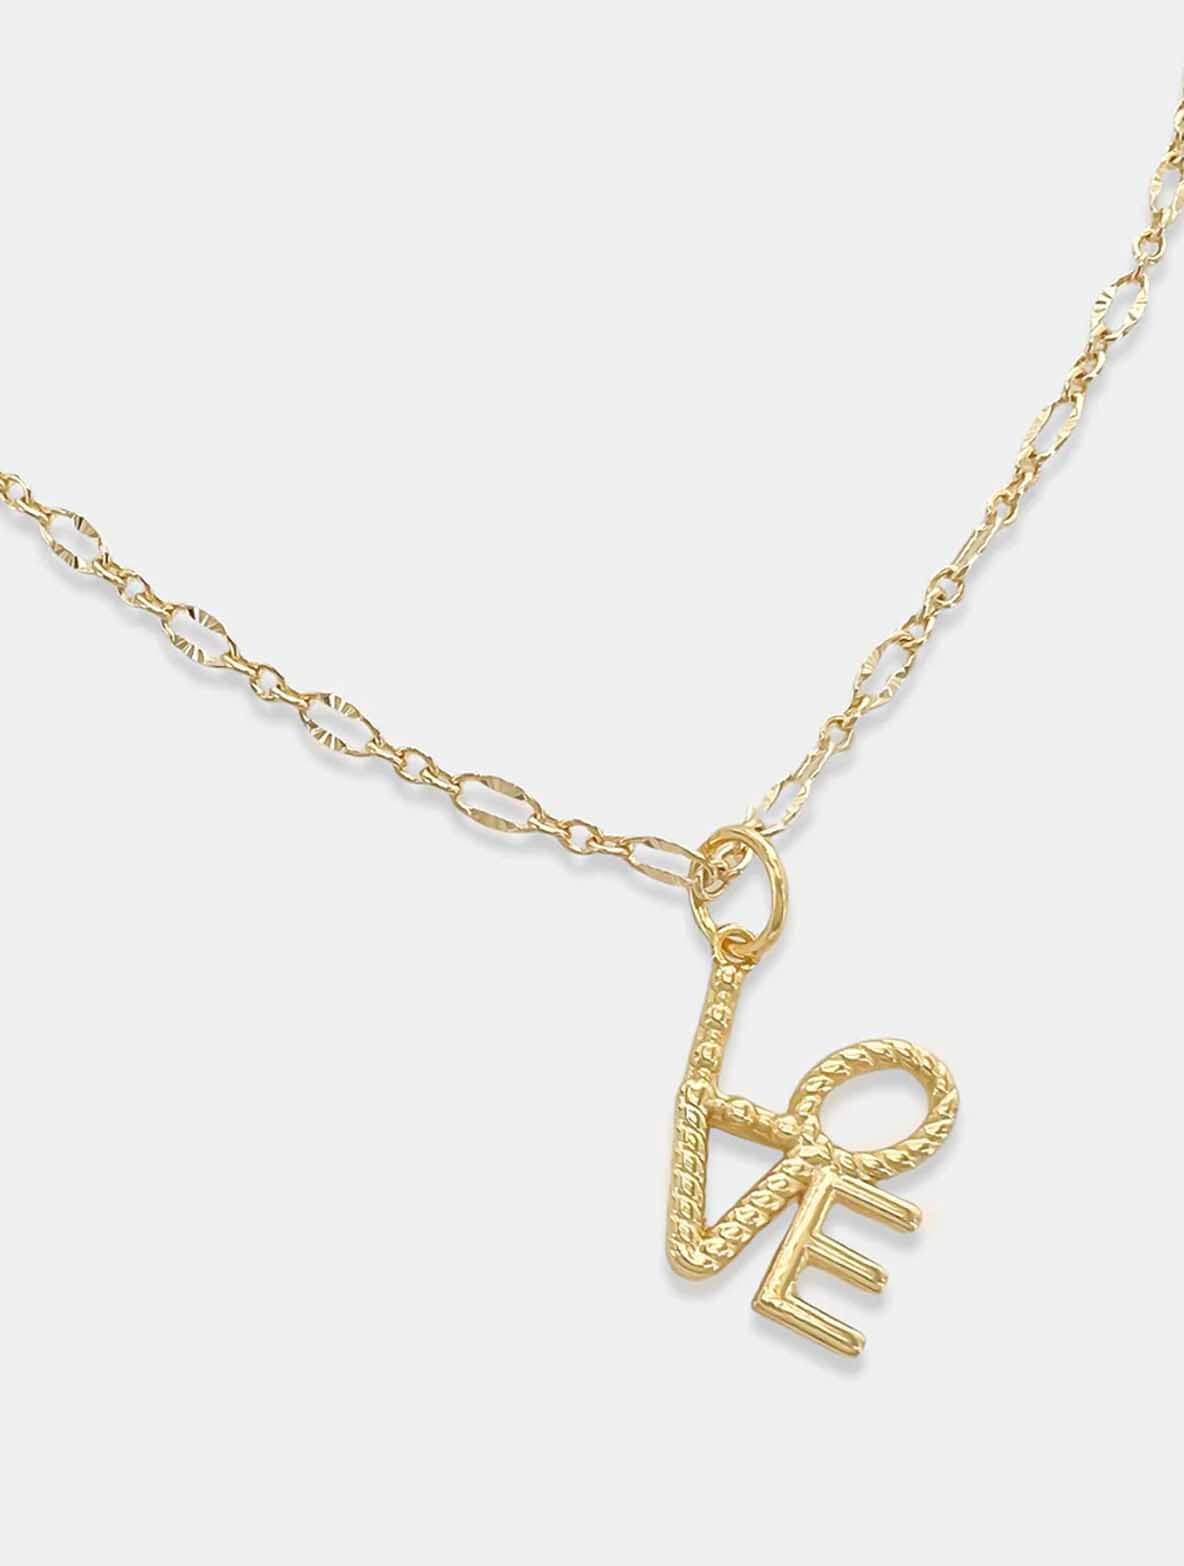 JAYNE Textured Chain LOVE Necklace in Gold